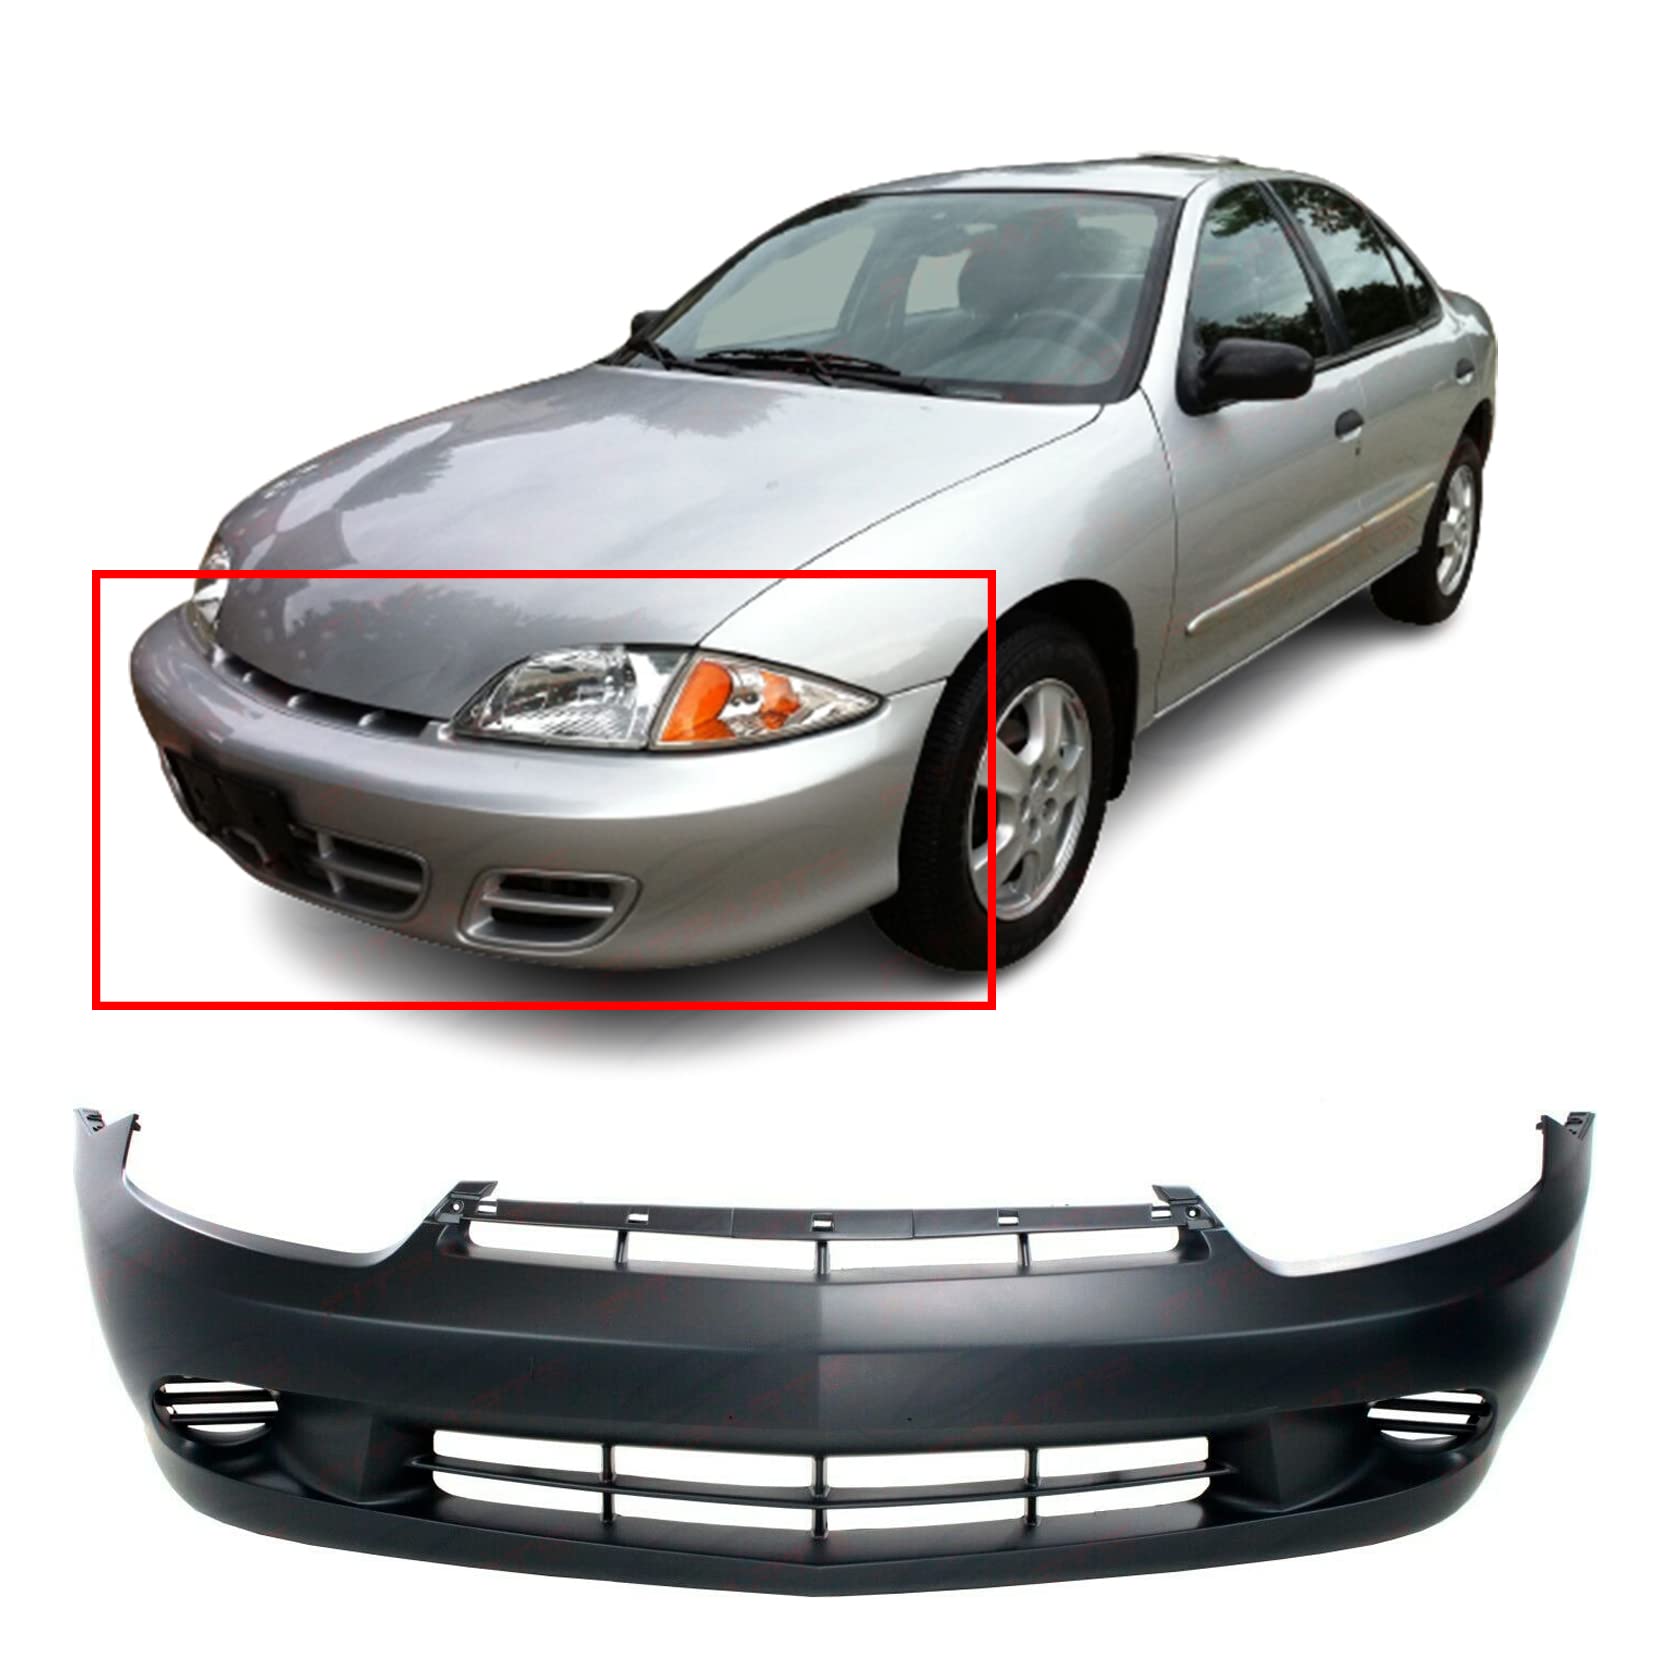 Front Plastic Bumper Cover Fascia for 2003-2005 Chevy Chevrolet Cavalier  Base LS Sedan Coupe 03-05. New, Primed and Ready for Paint. GM1000662  12335575 2004